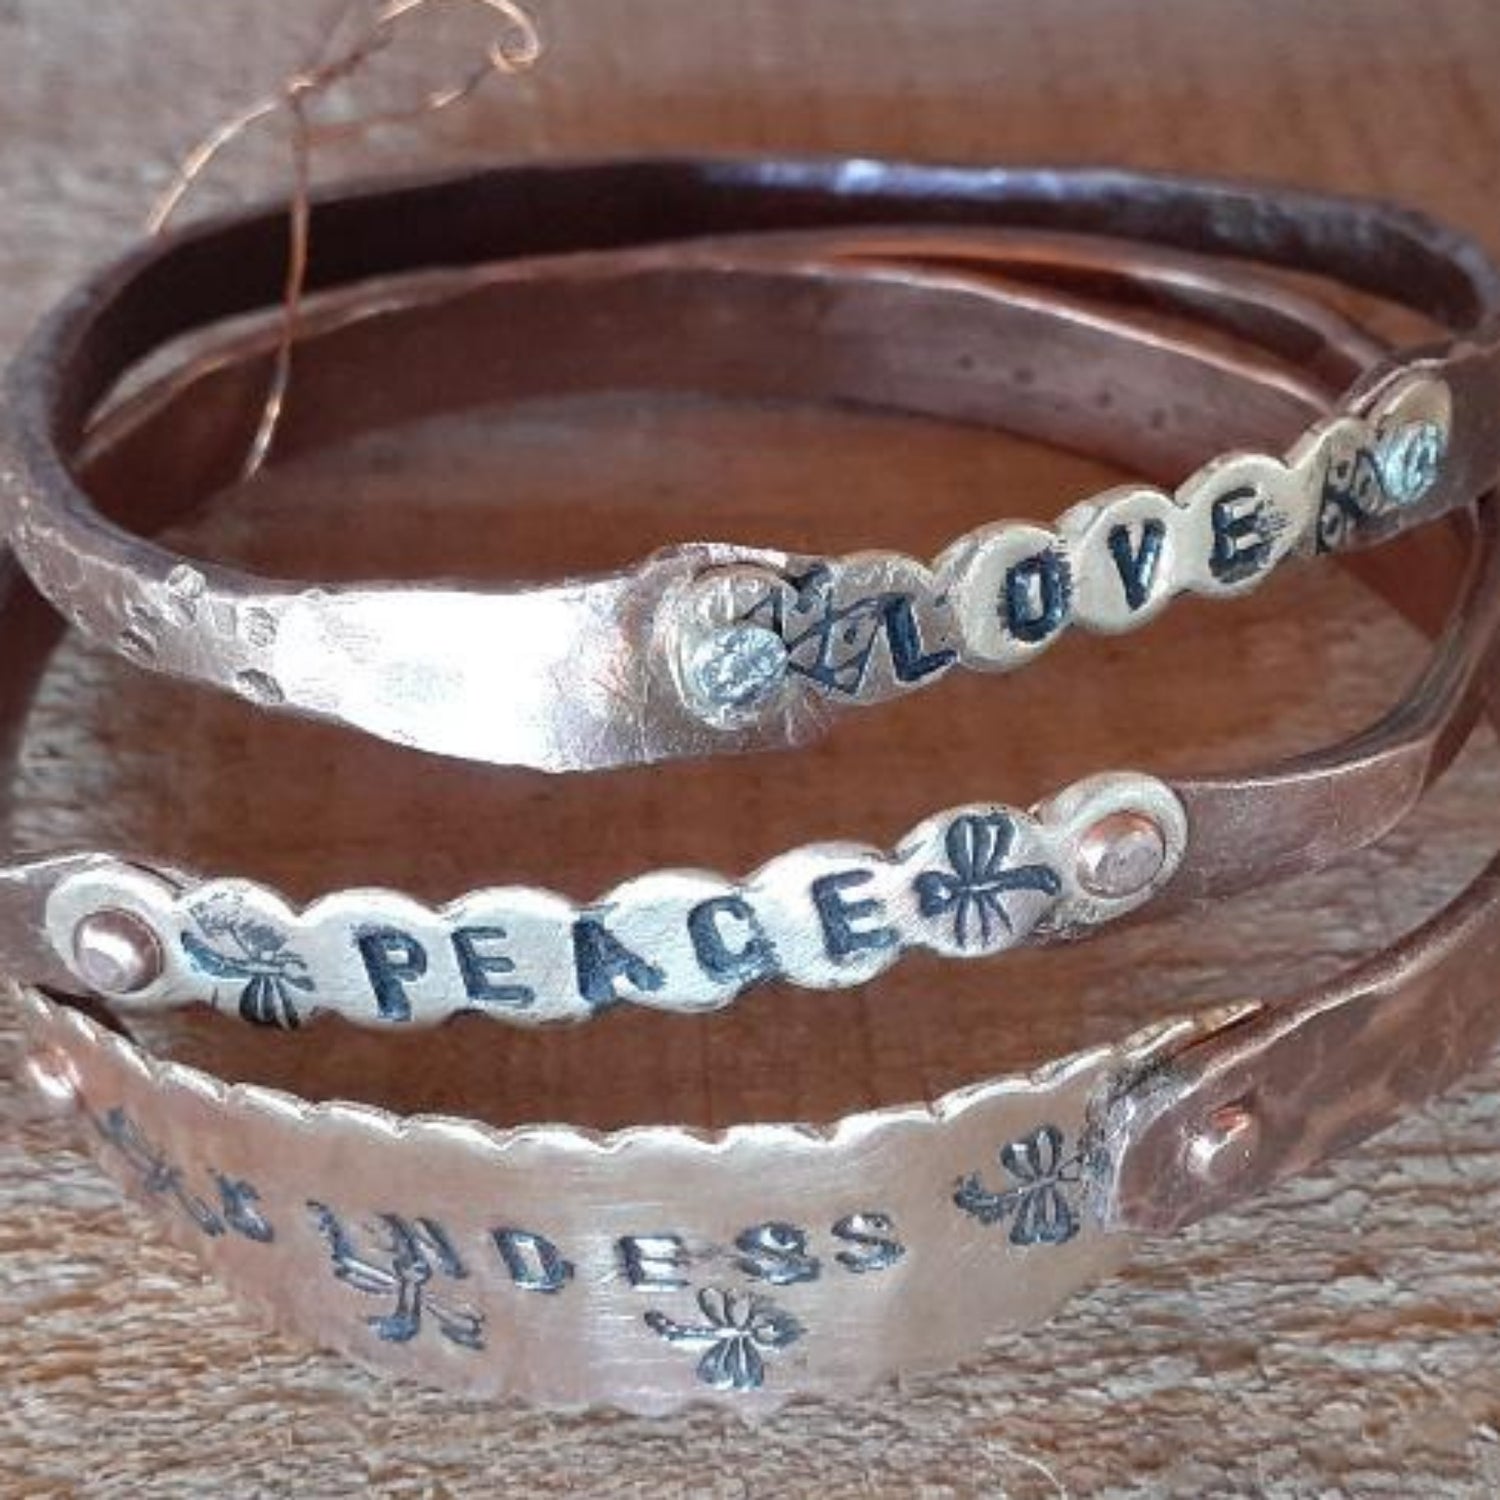 Mixed Metal Love, Peace and Kindness Mixed Metal Inspiration Bangles |WRD - WarmRainyDay